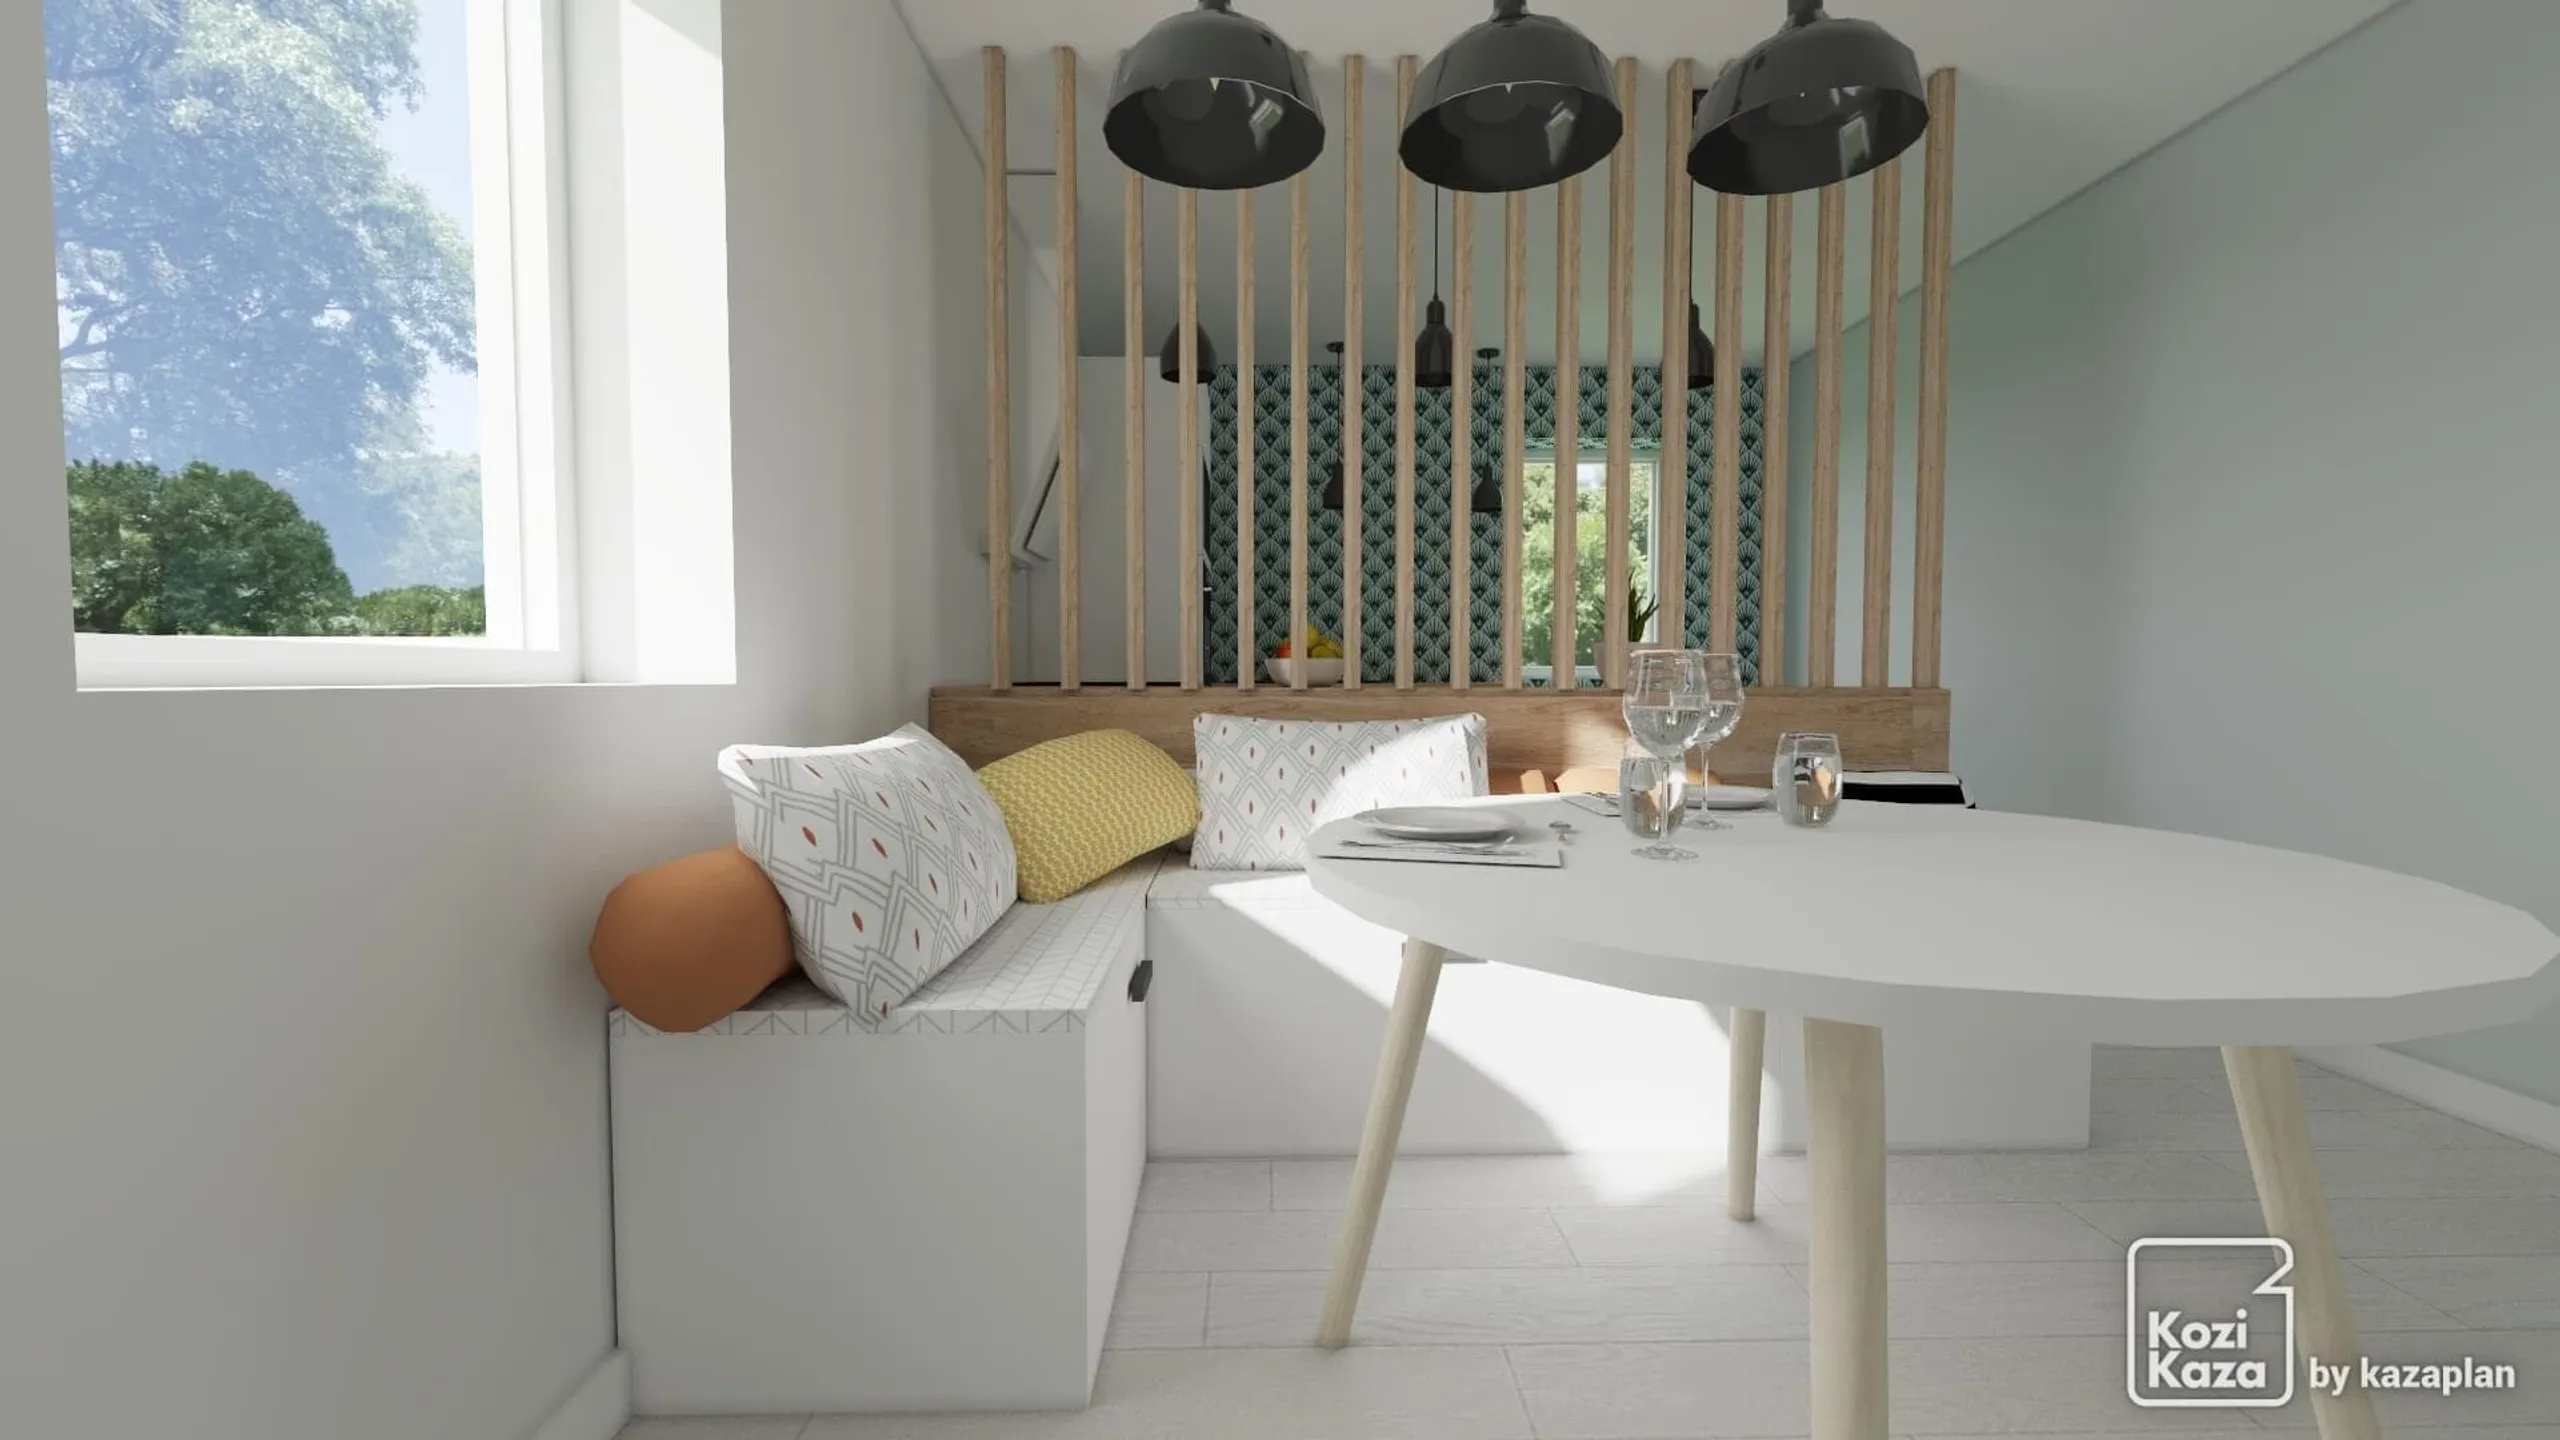 Idea for white and Scandinavian wood kitchen in U 3D 2